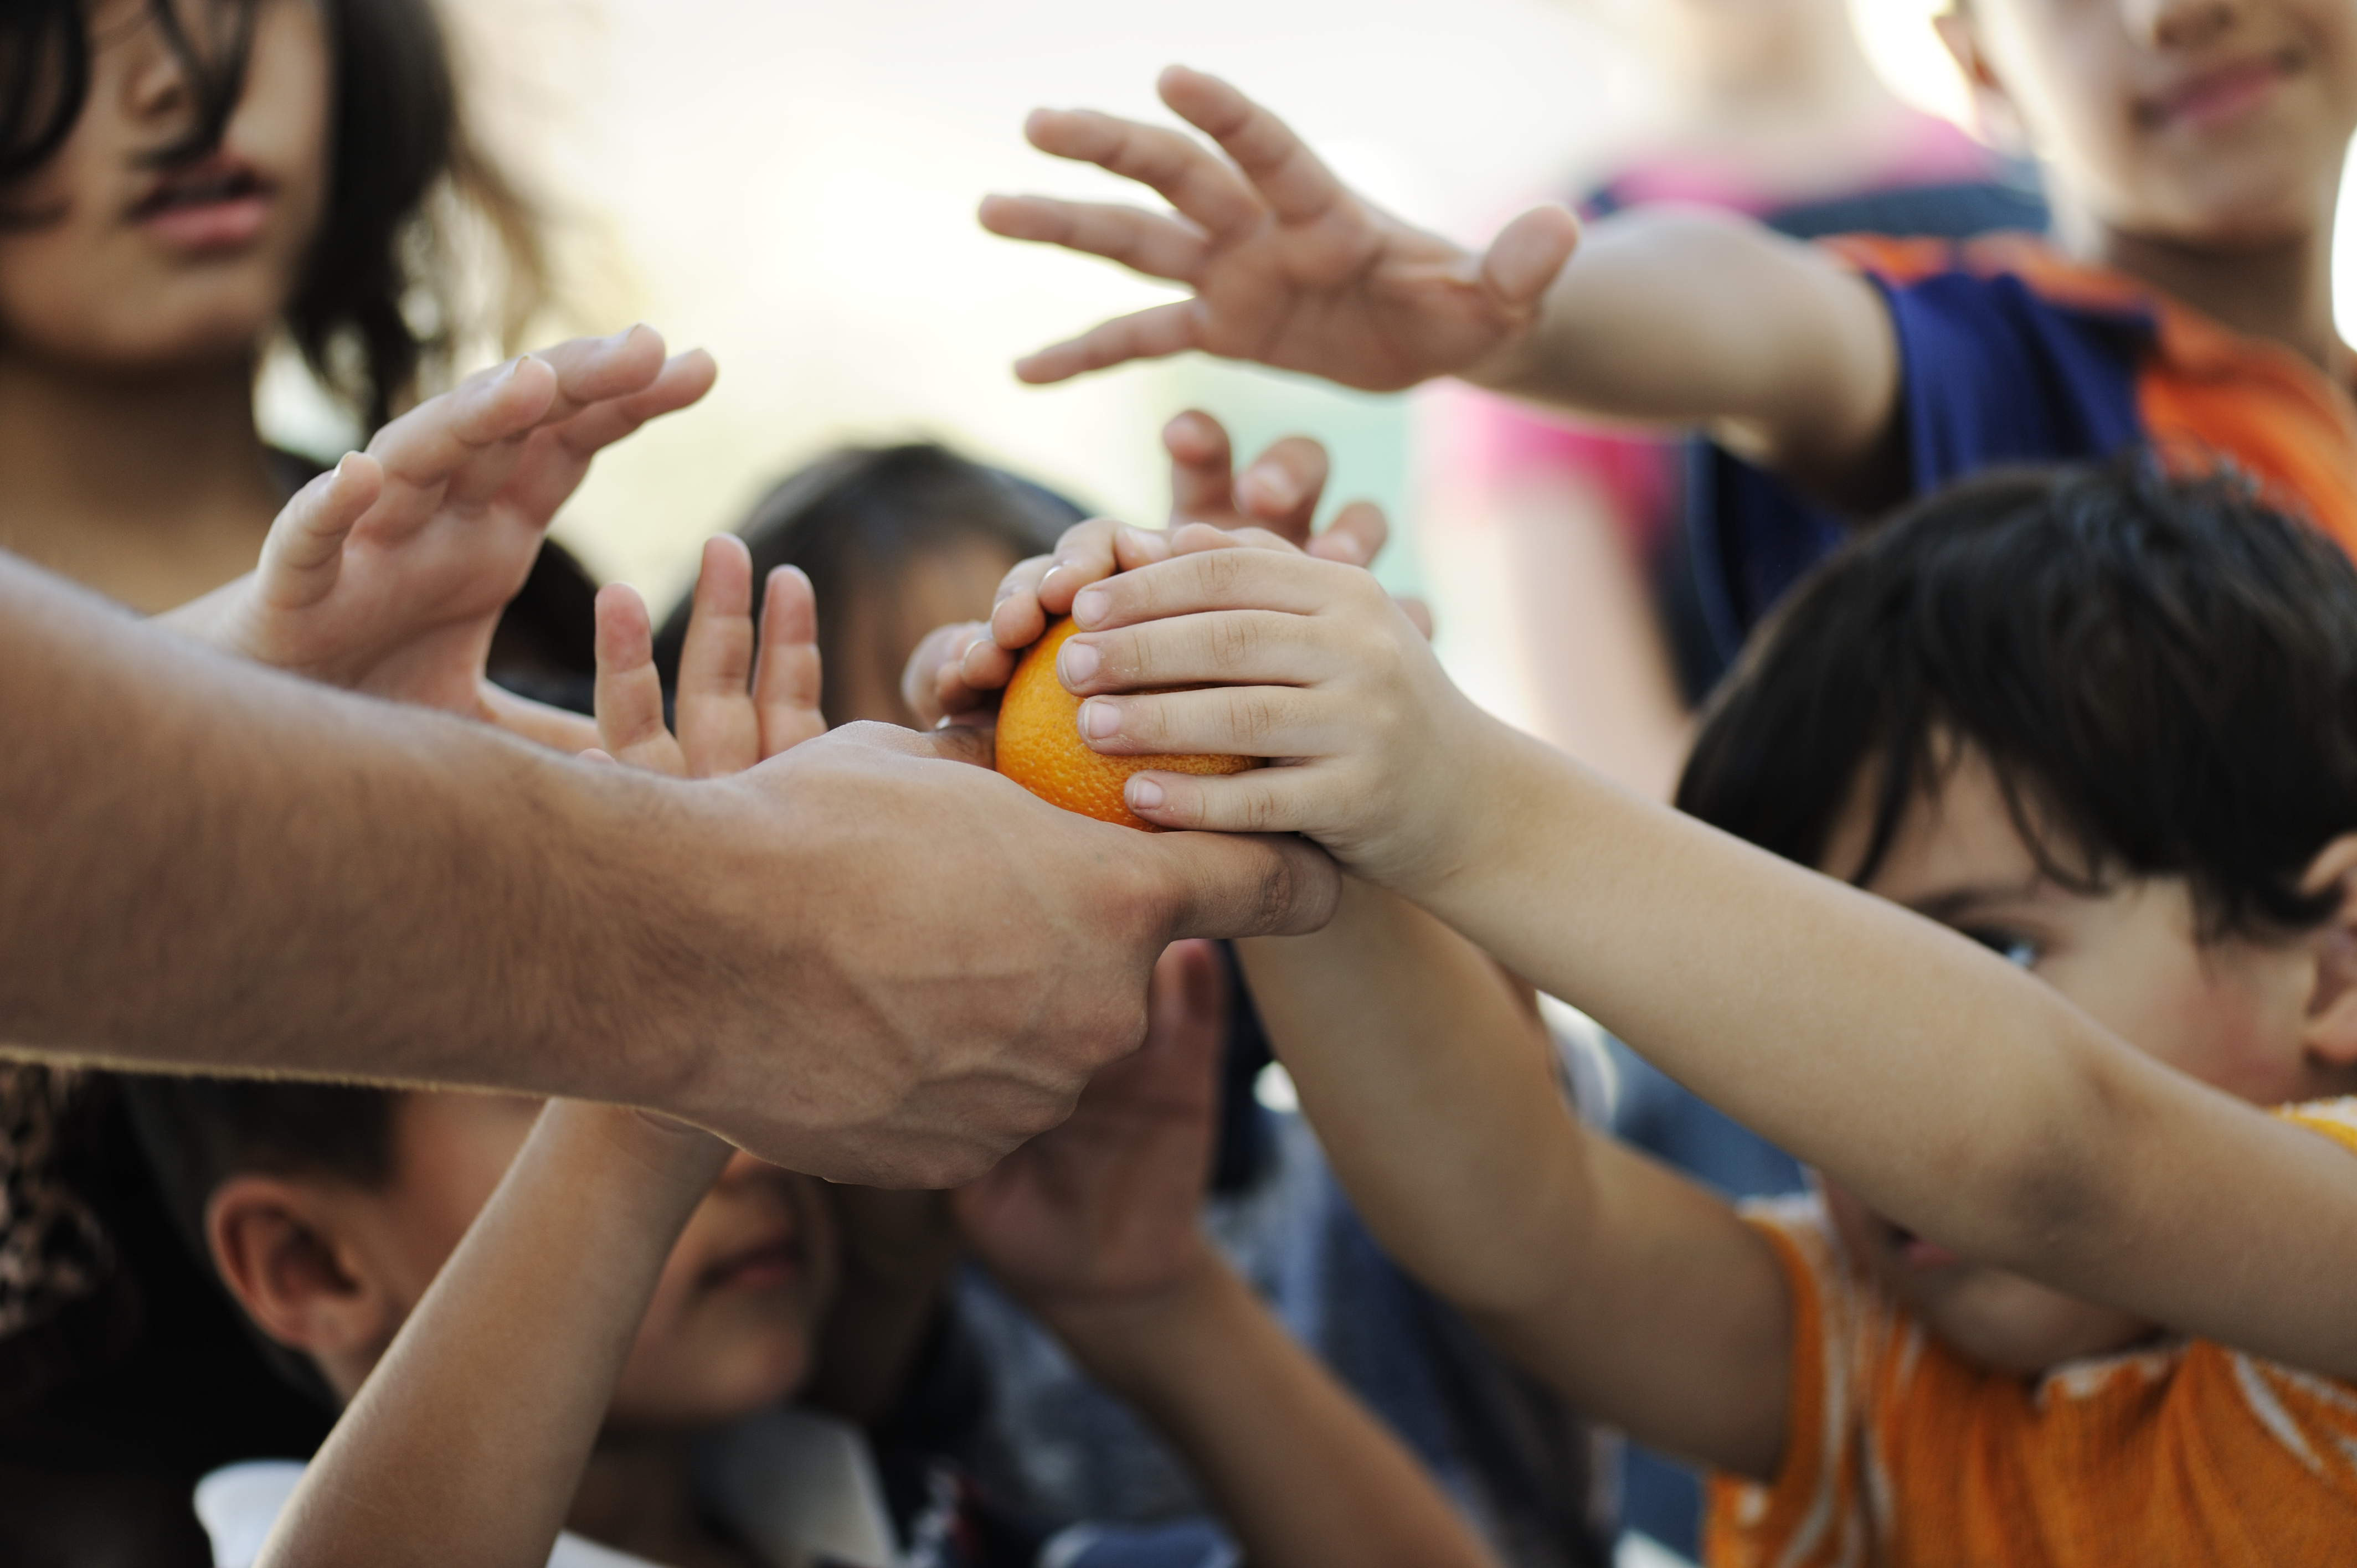 Hands of refugees reaching for an orange